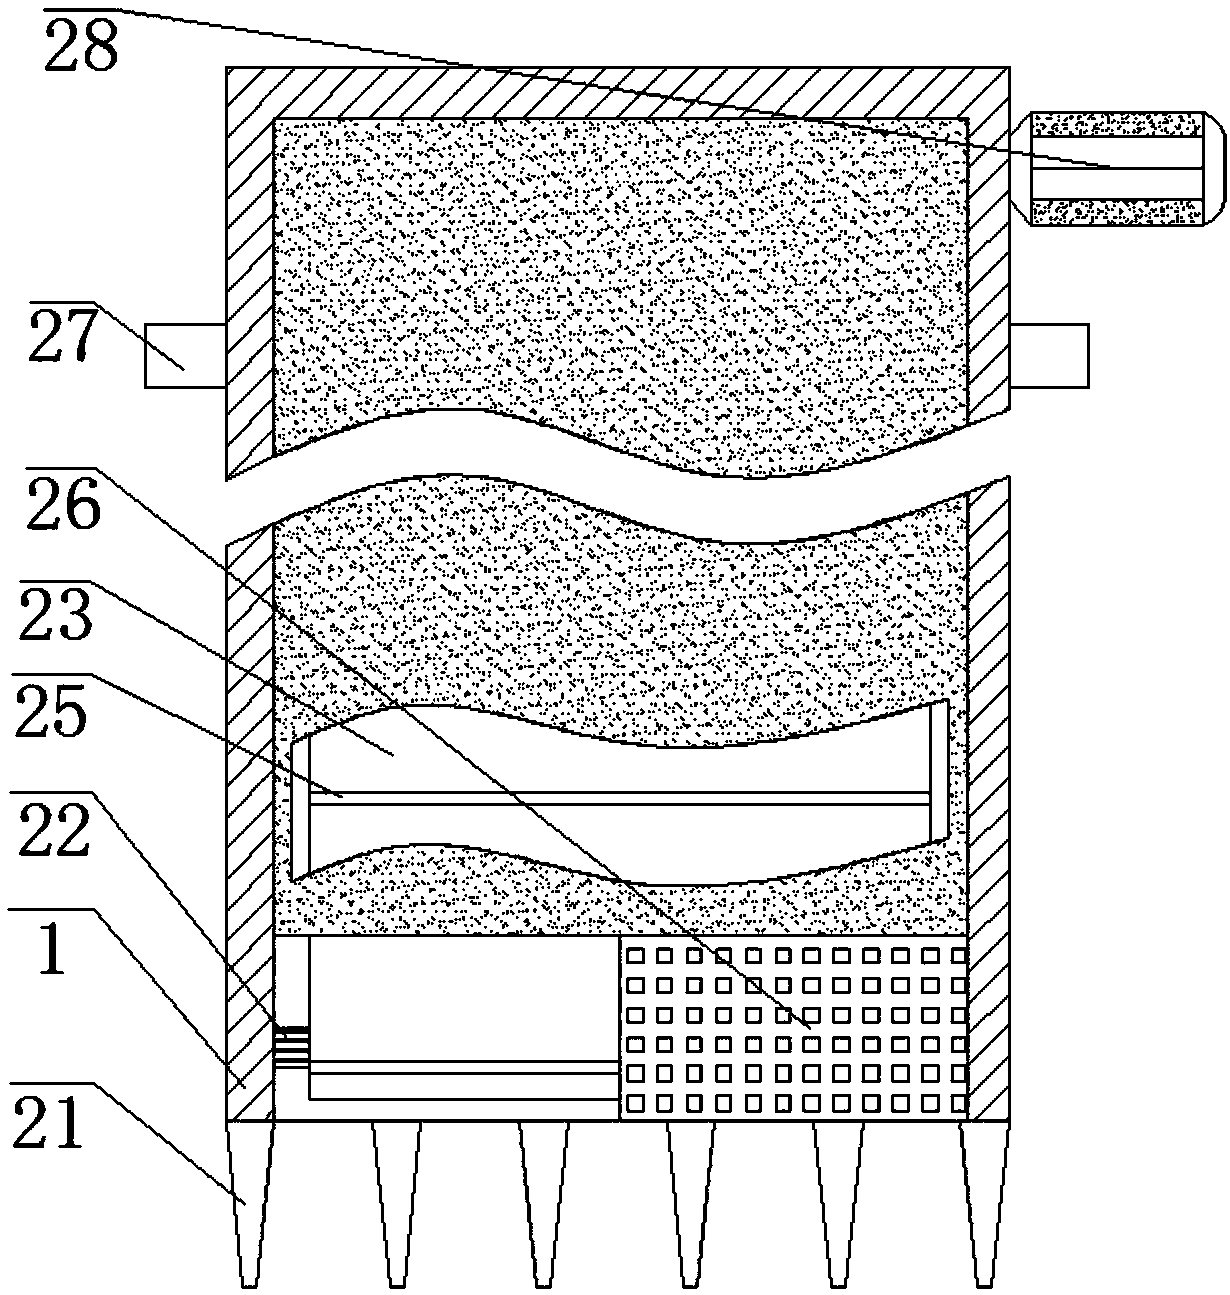 Extraction device for remediation of heavy metal contaminated soil